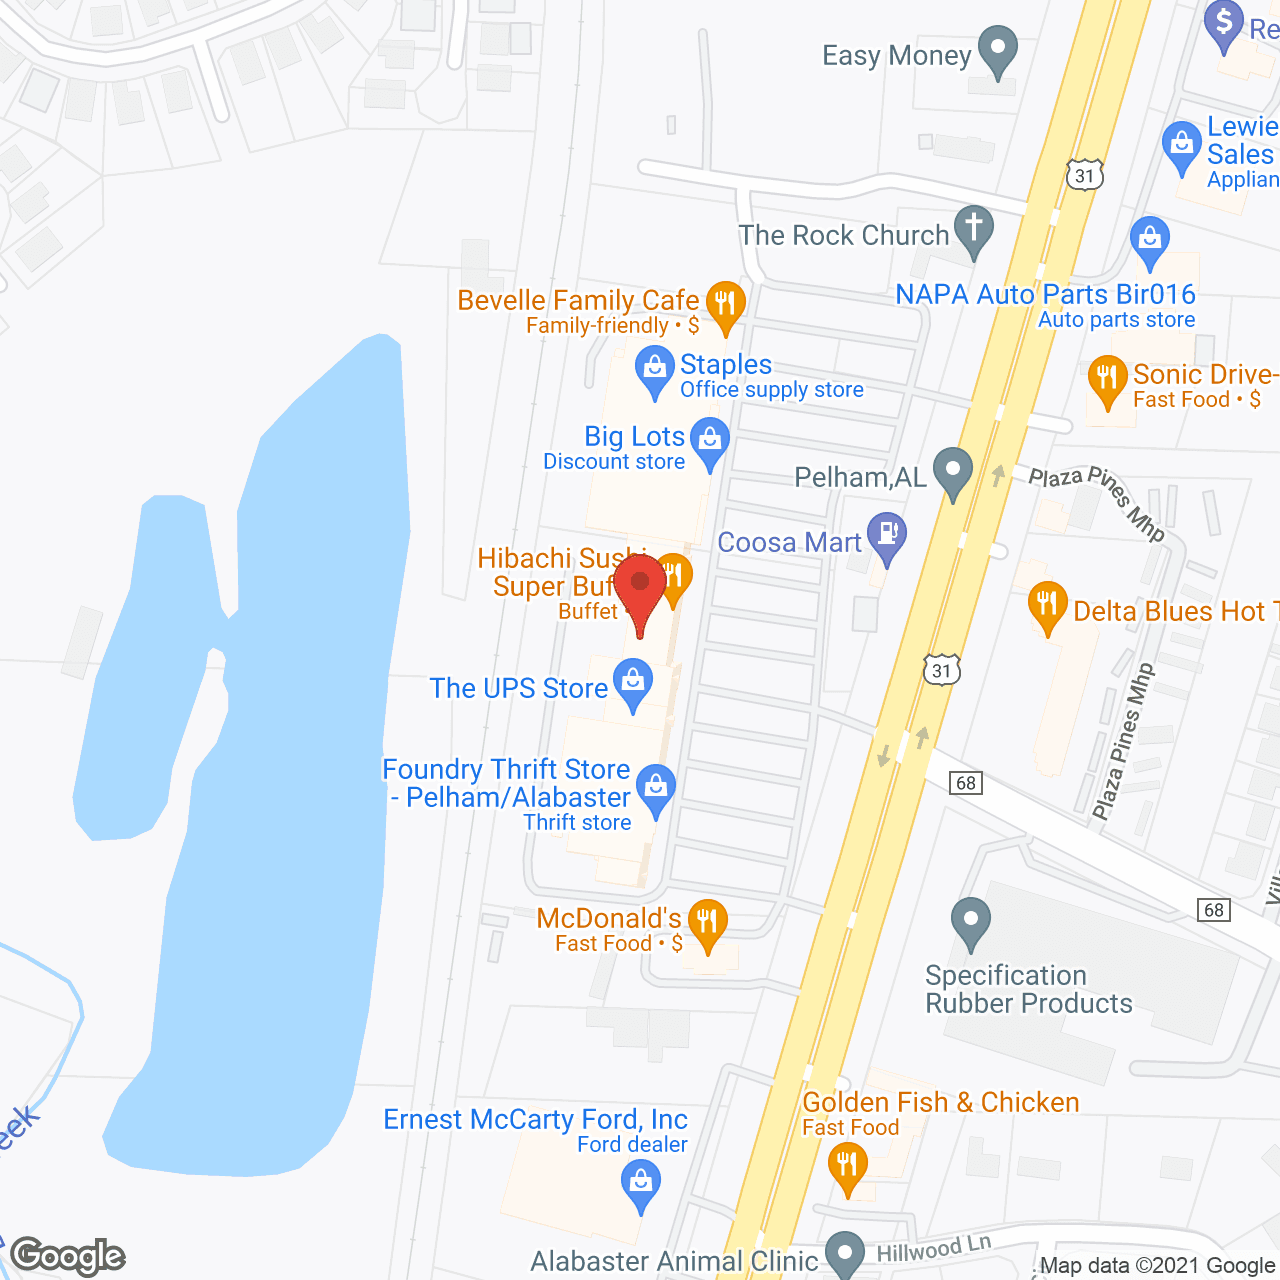 Preferred Care at Home of Greater Birmingham in google map